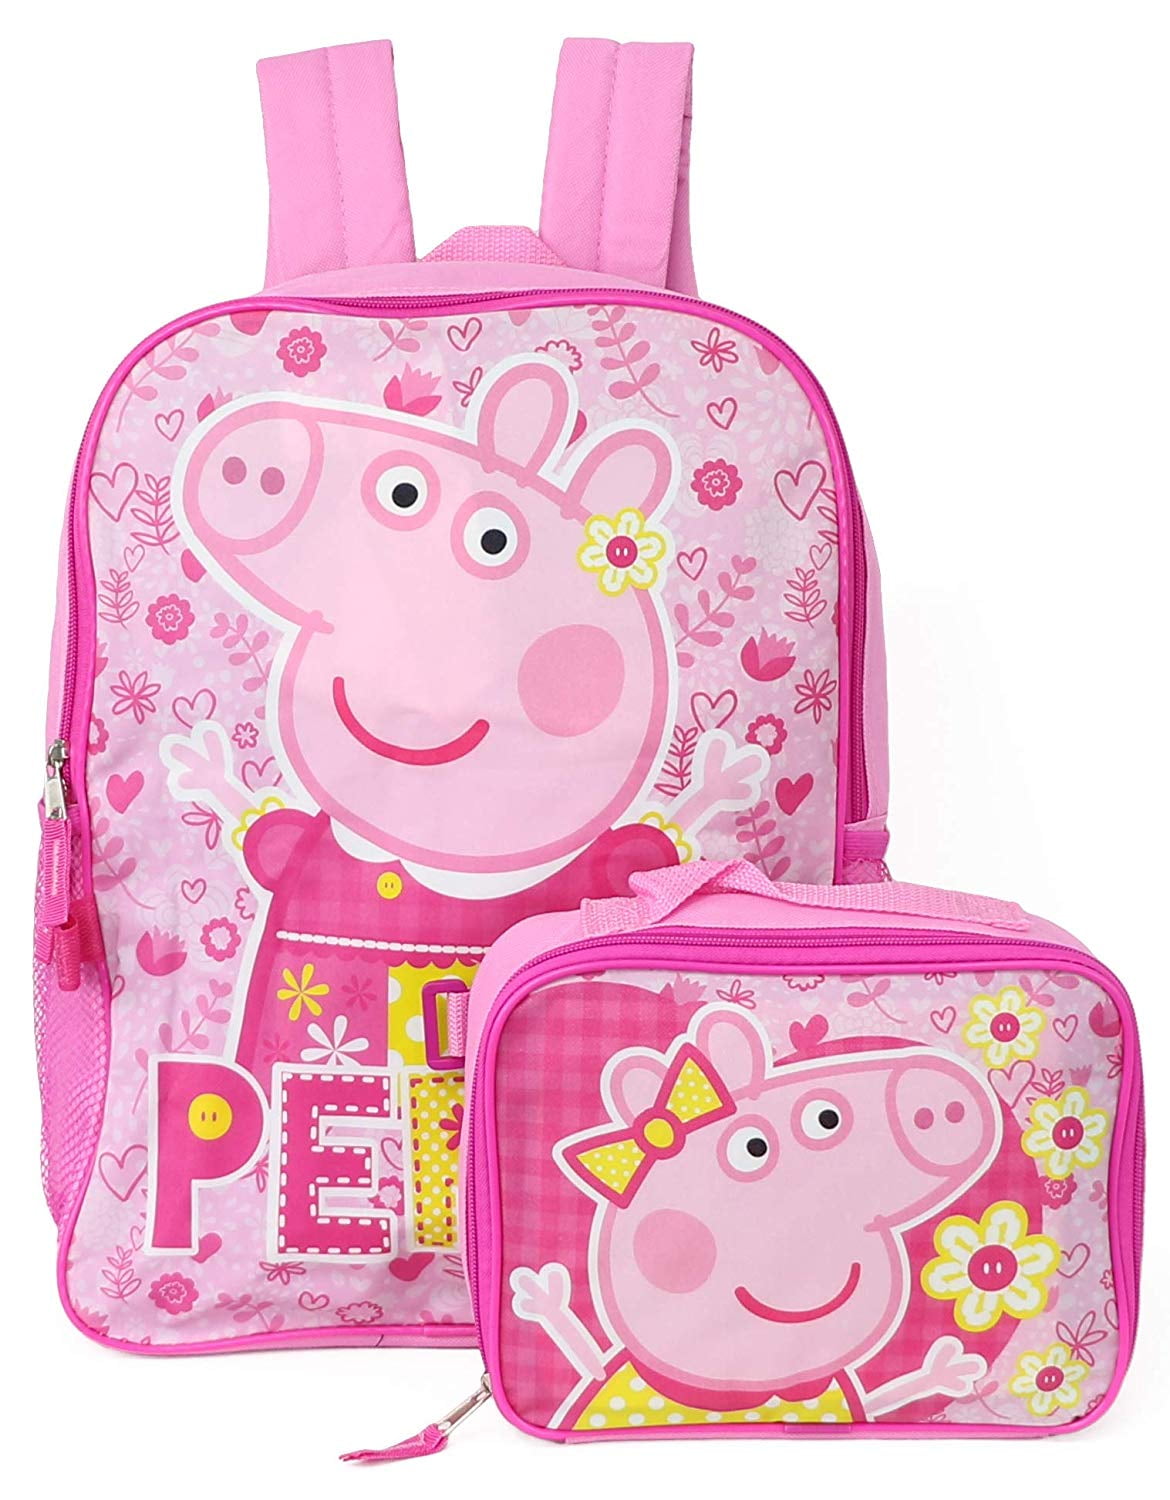 PEPPA PIG LUNCH BOX BAG BRAND NEW INSULATED